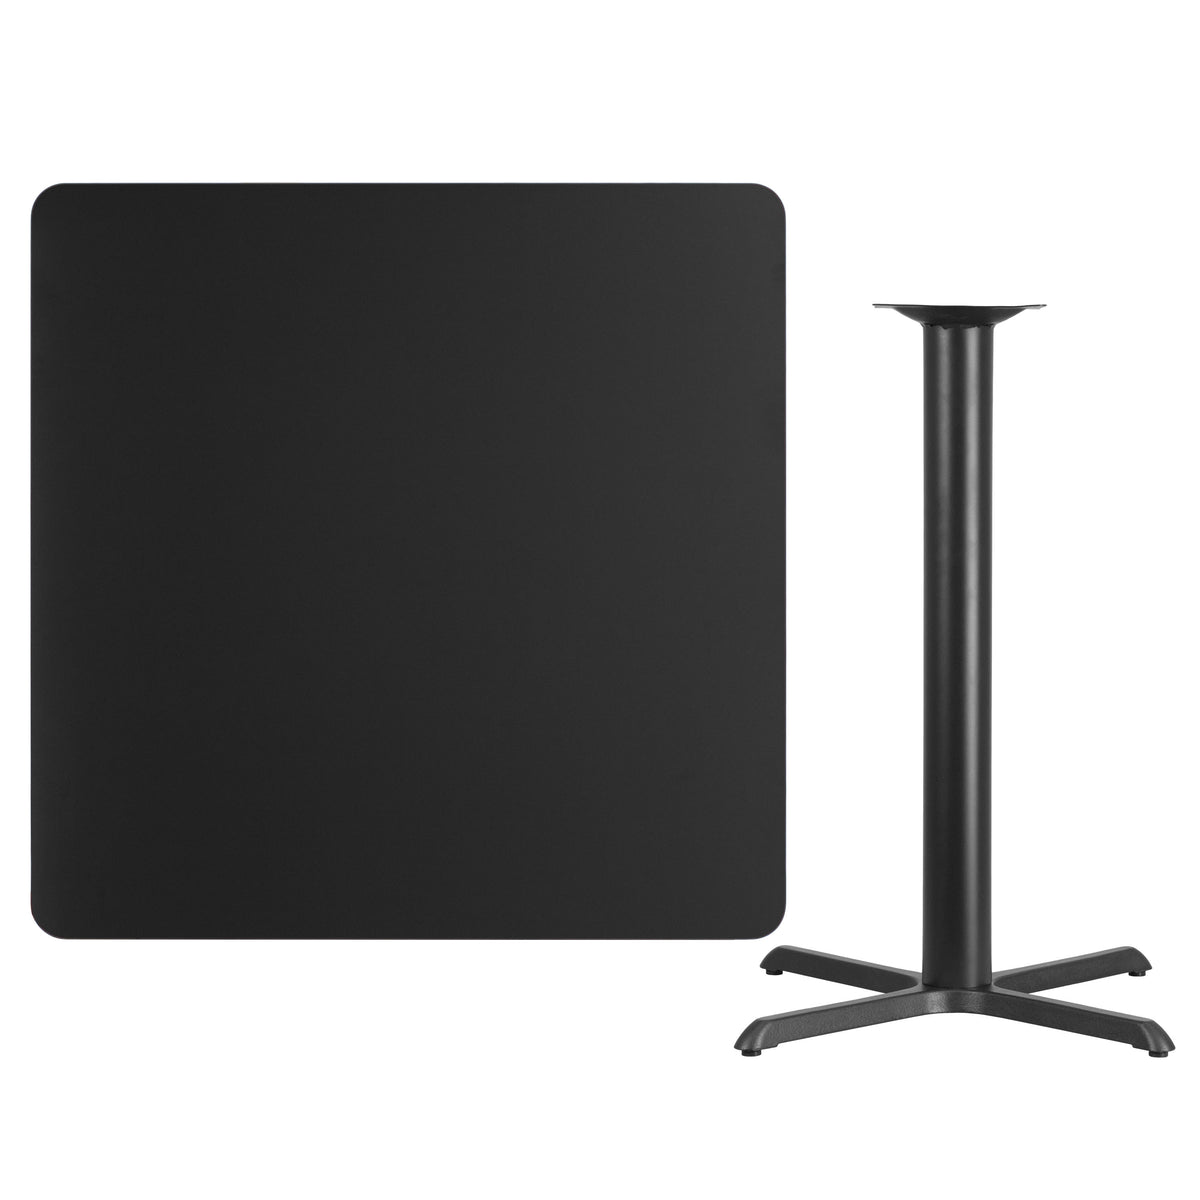 Black |#| 42inch Square Black Laminate Table Top with 33inch x 33inch Bar Height Table Base